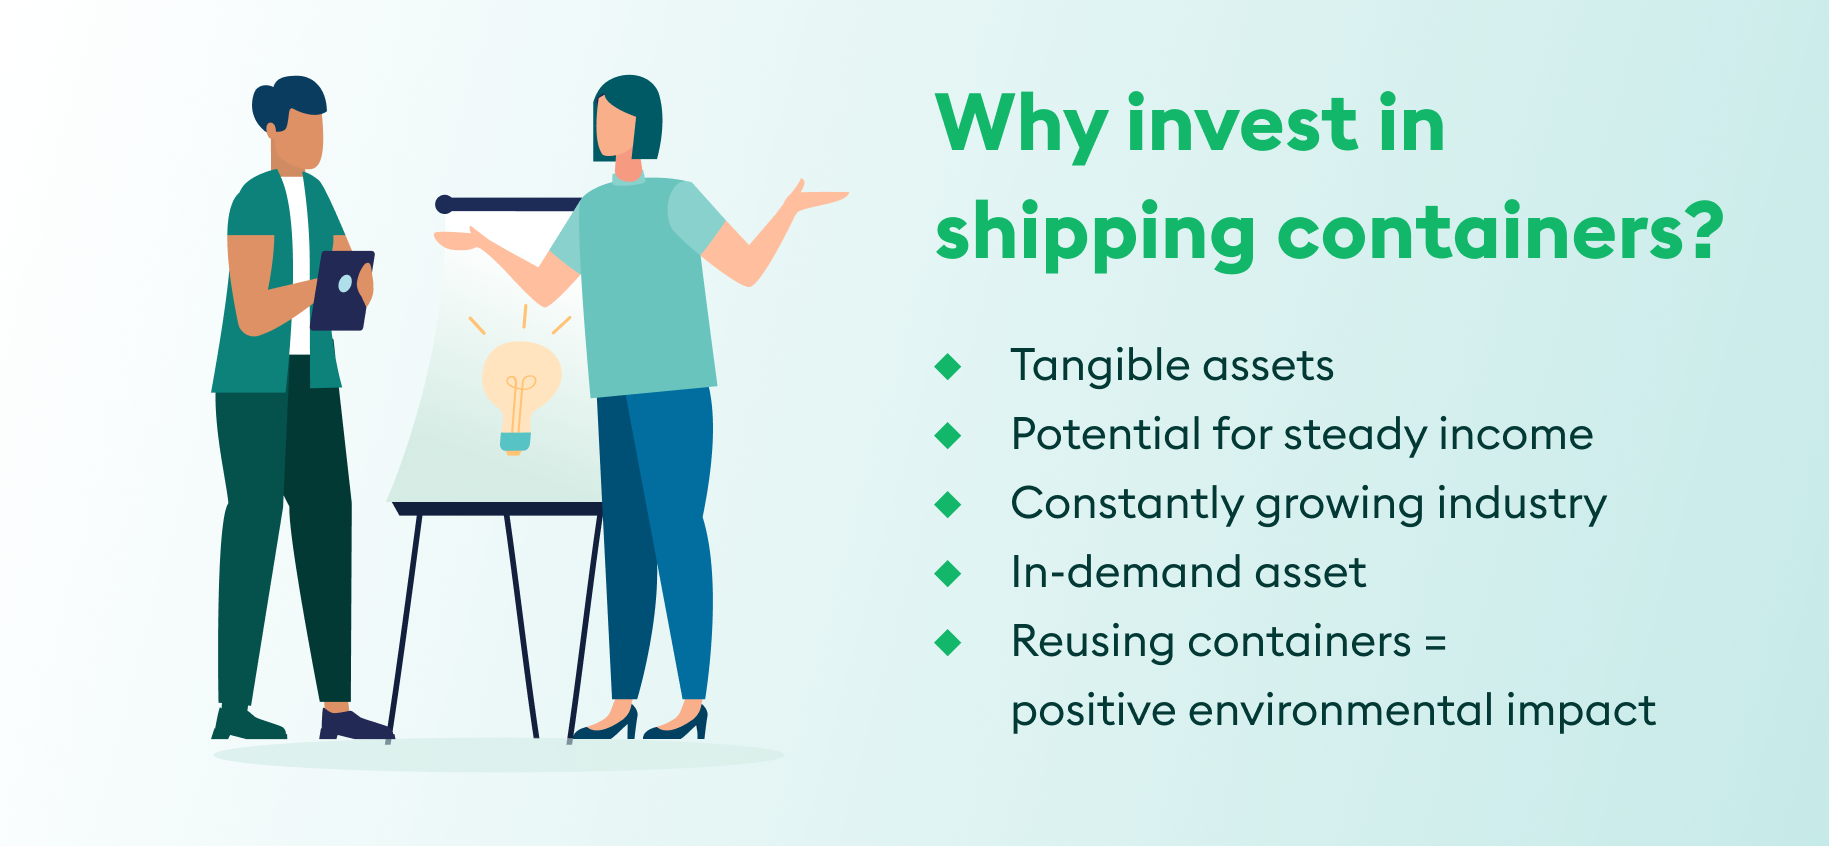 Why invest in shipping containers?